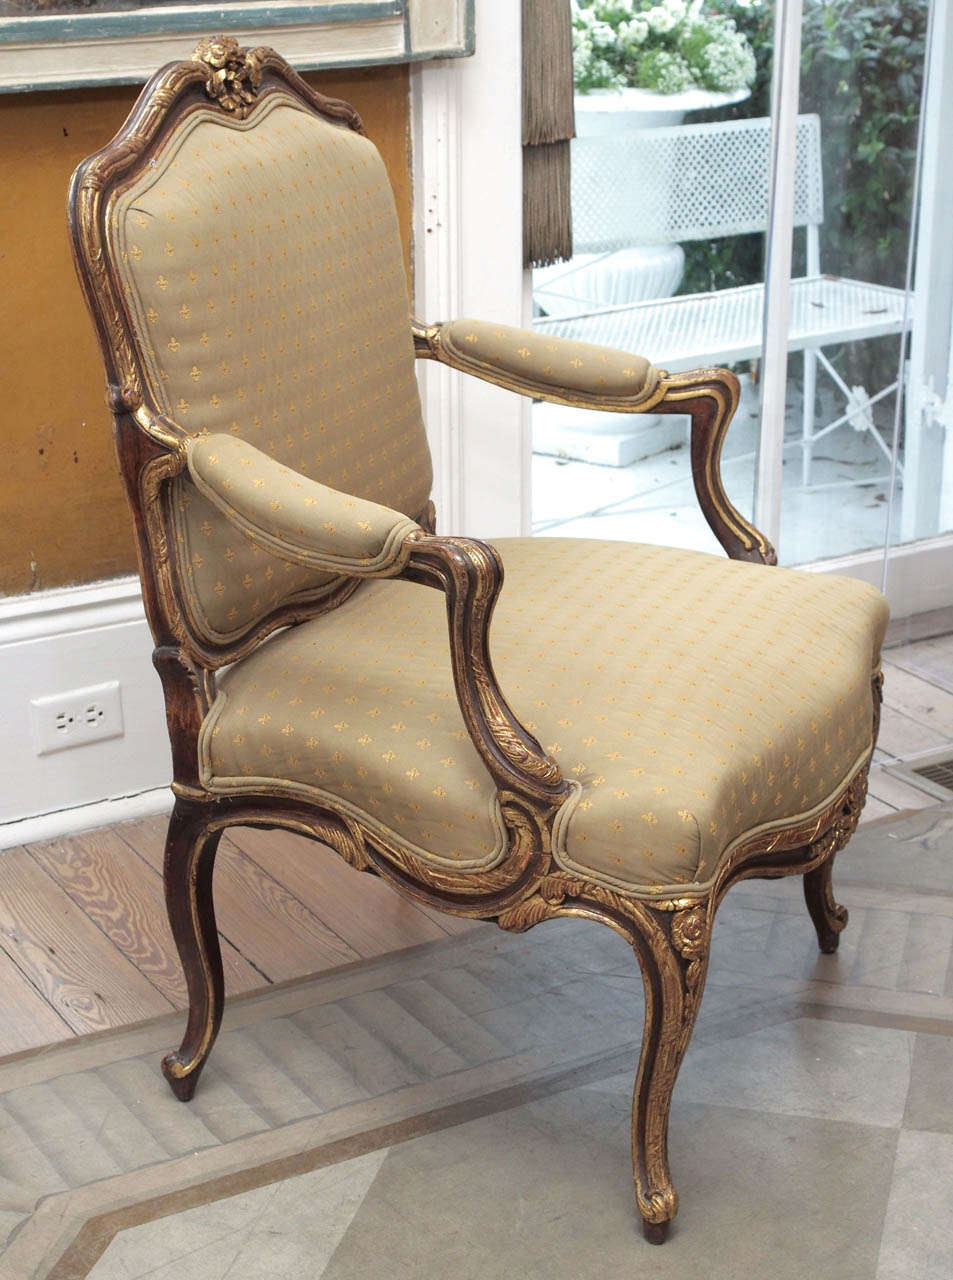 Elegant pair of French fauteuils with detailed gilt painted carving and curving lines.